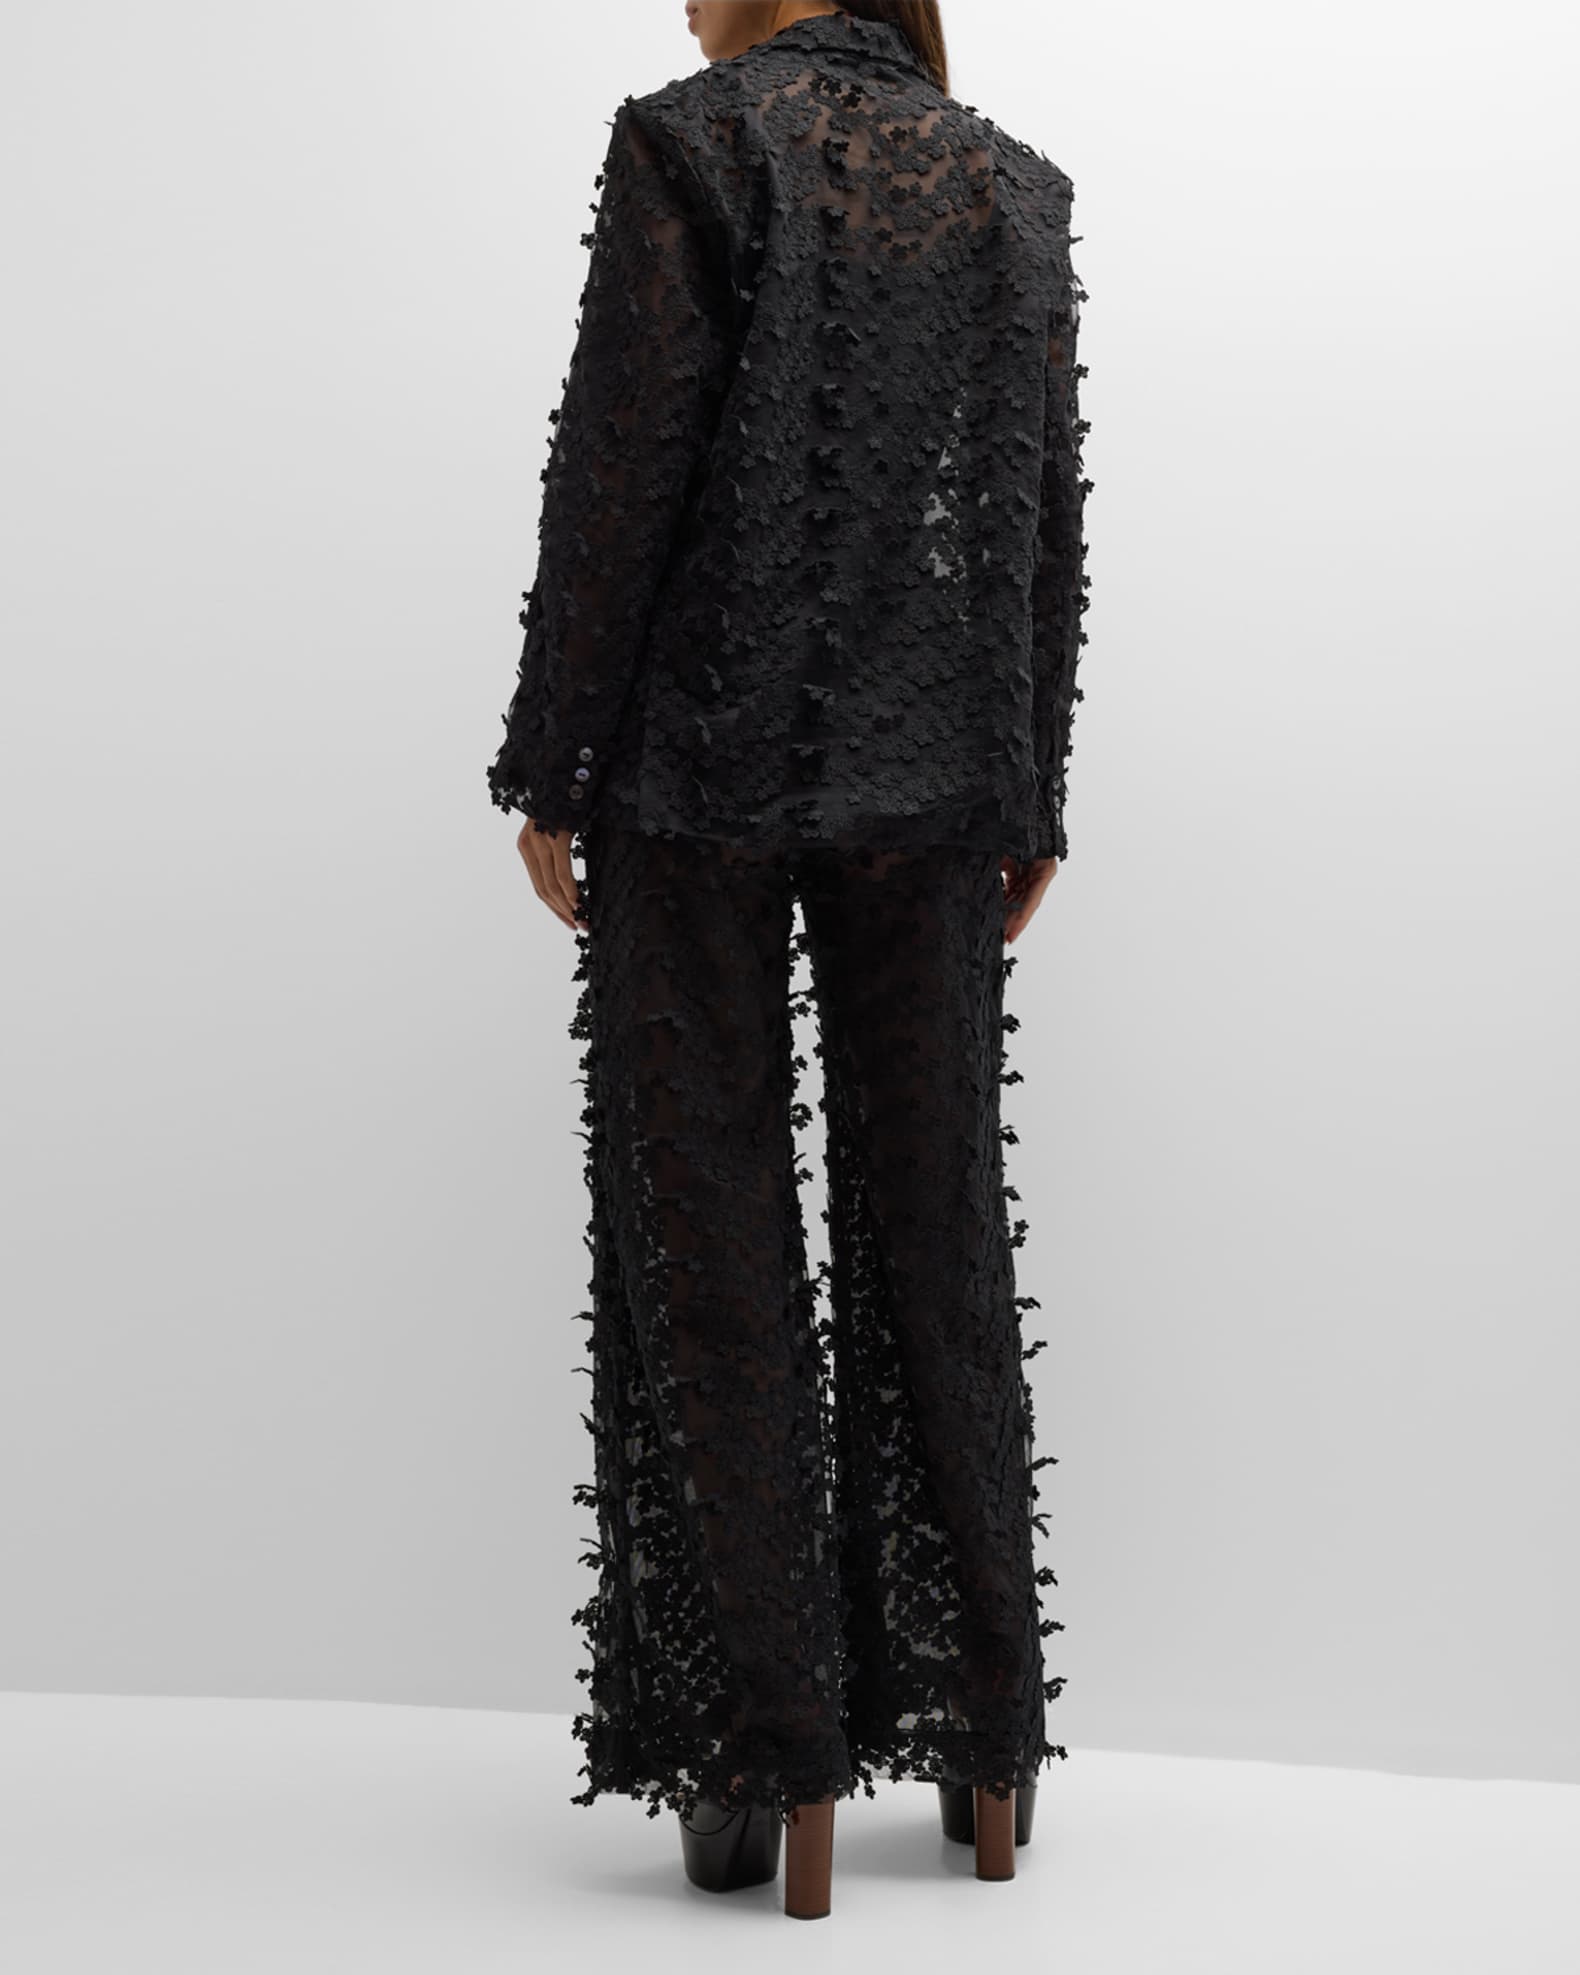 Cynthia Rowley High-Rise Floral Applique Tulle Pants | Neiman Marcus